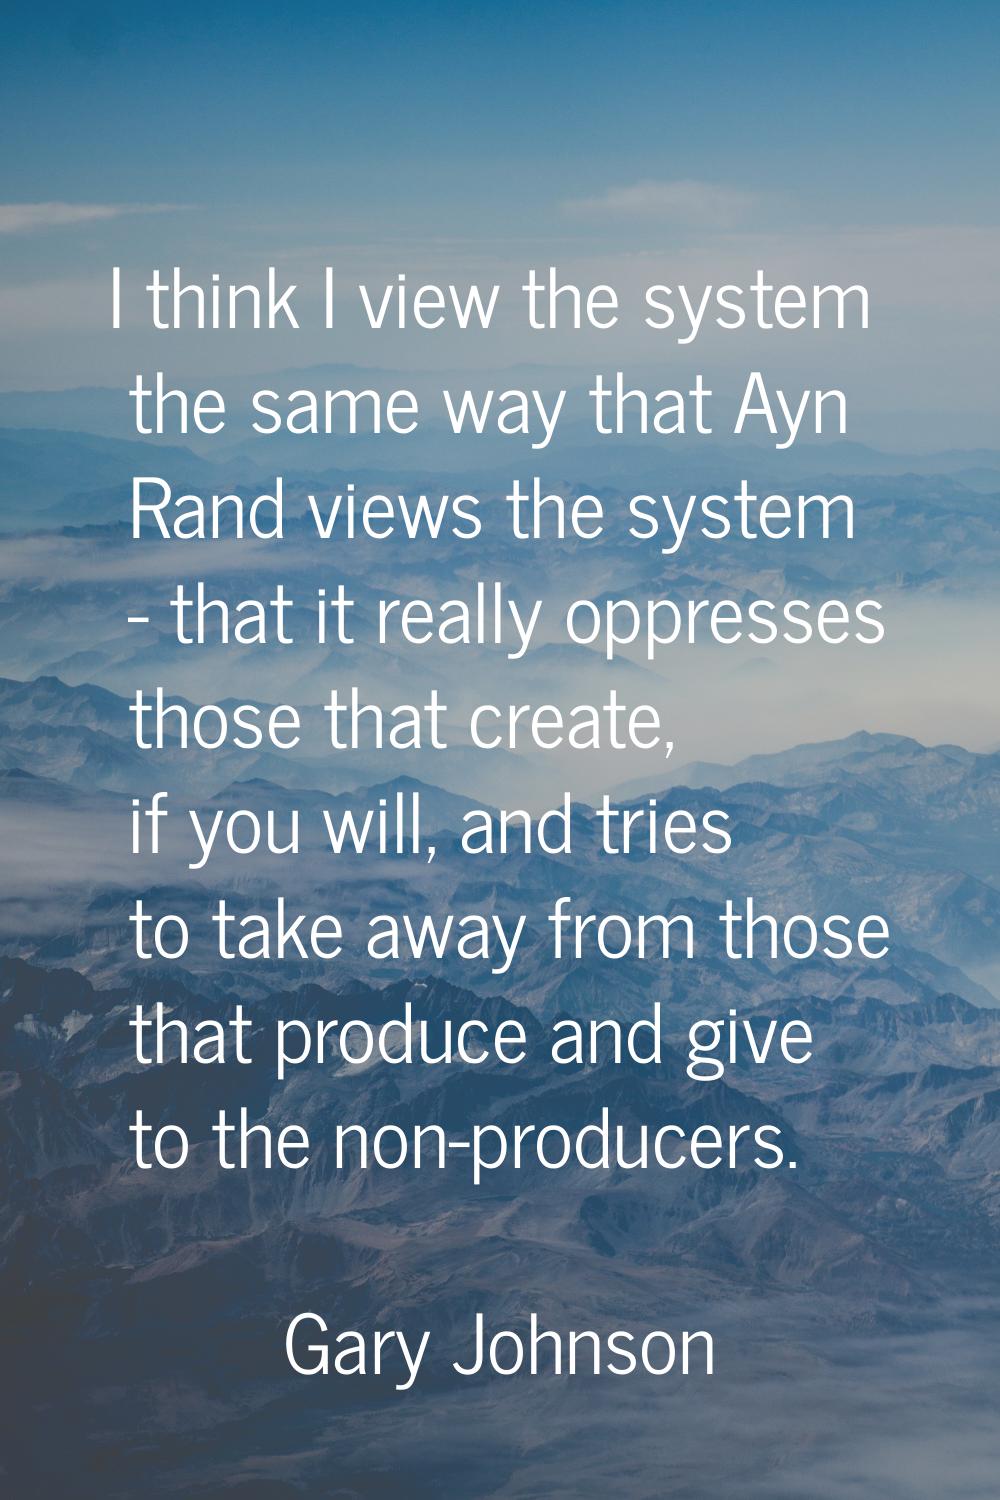 I think I view the system the same way that Ayn Rand views the system - that it really oppresses th